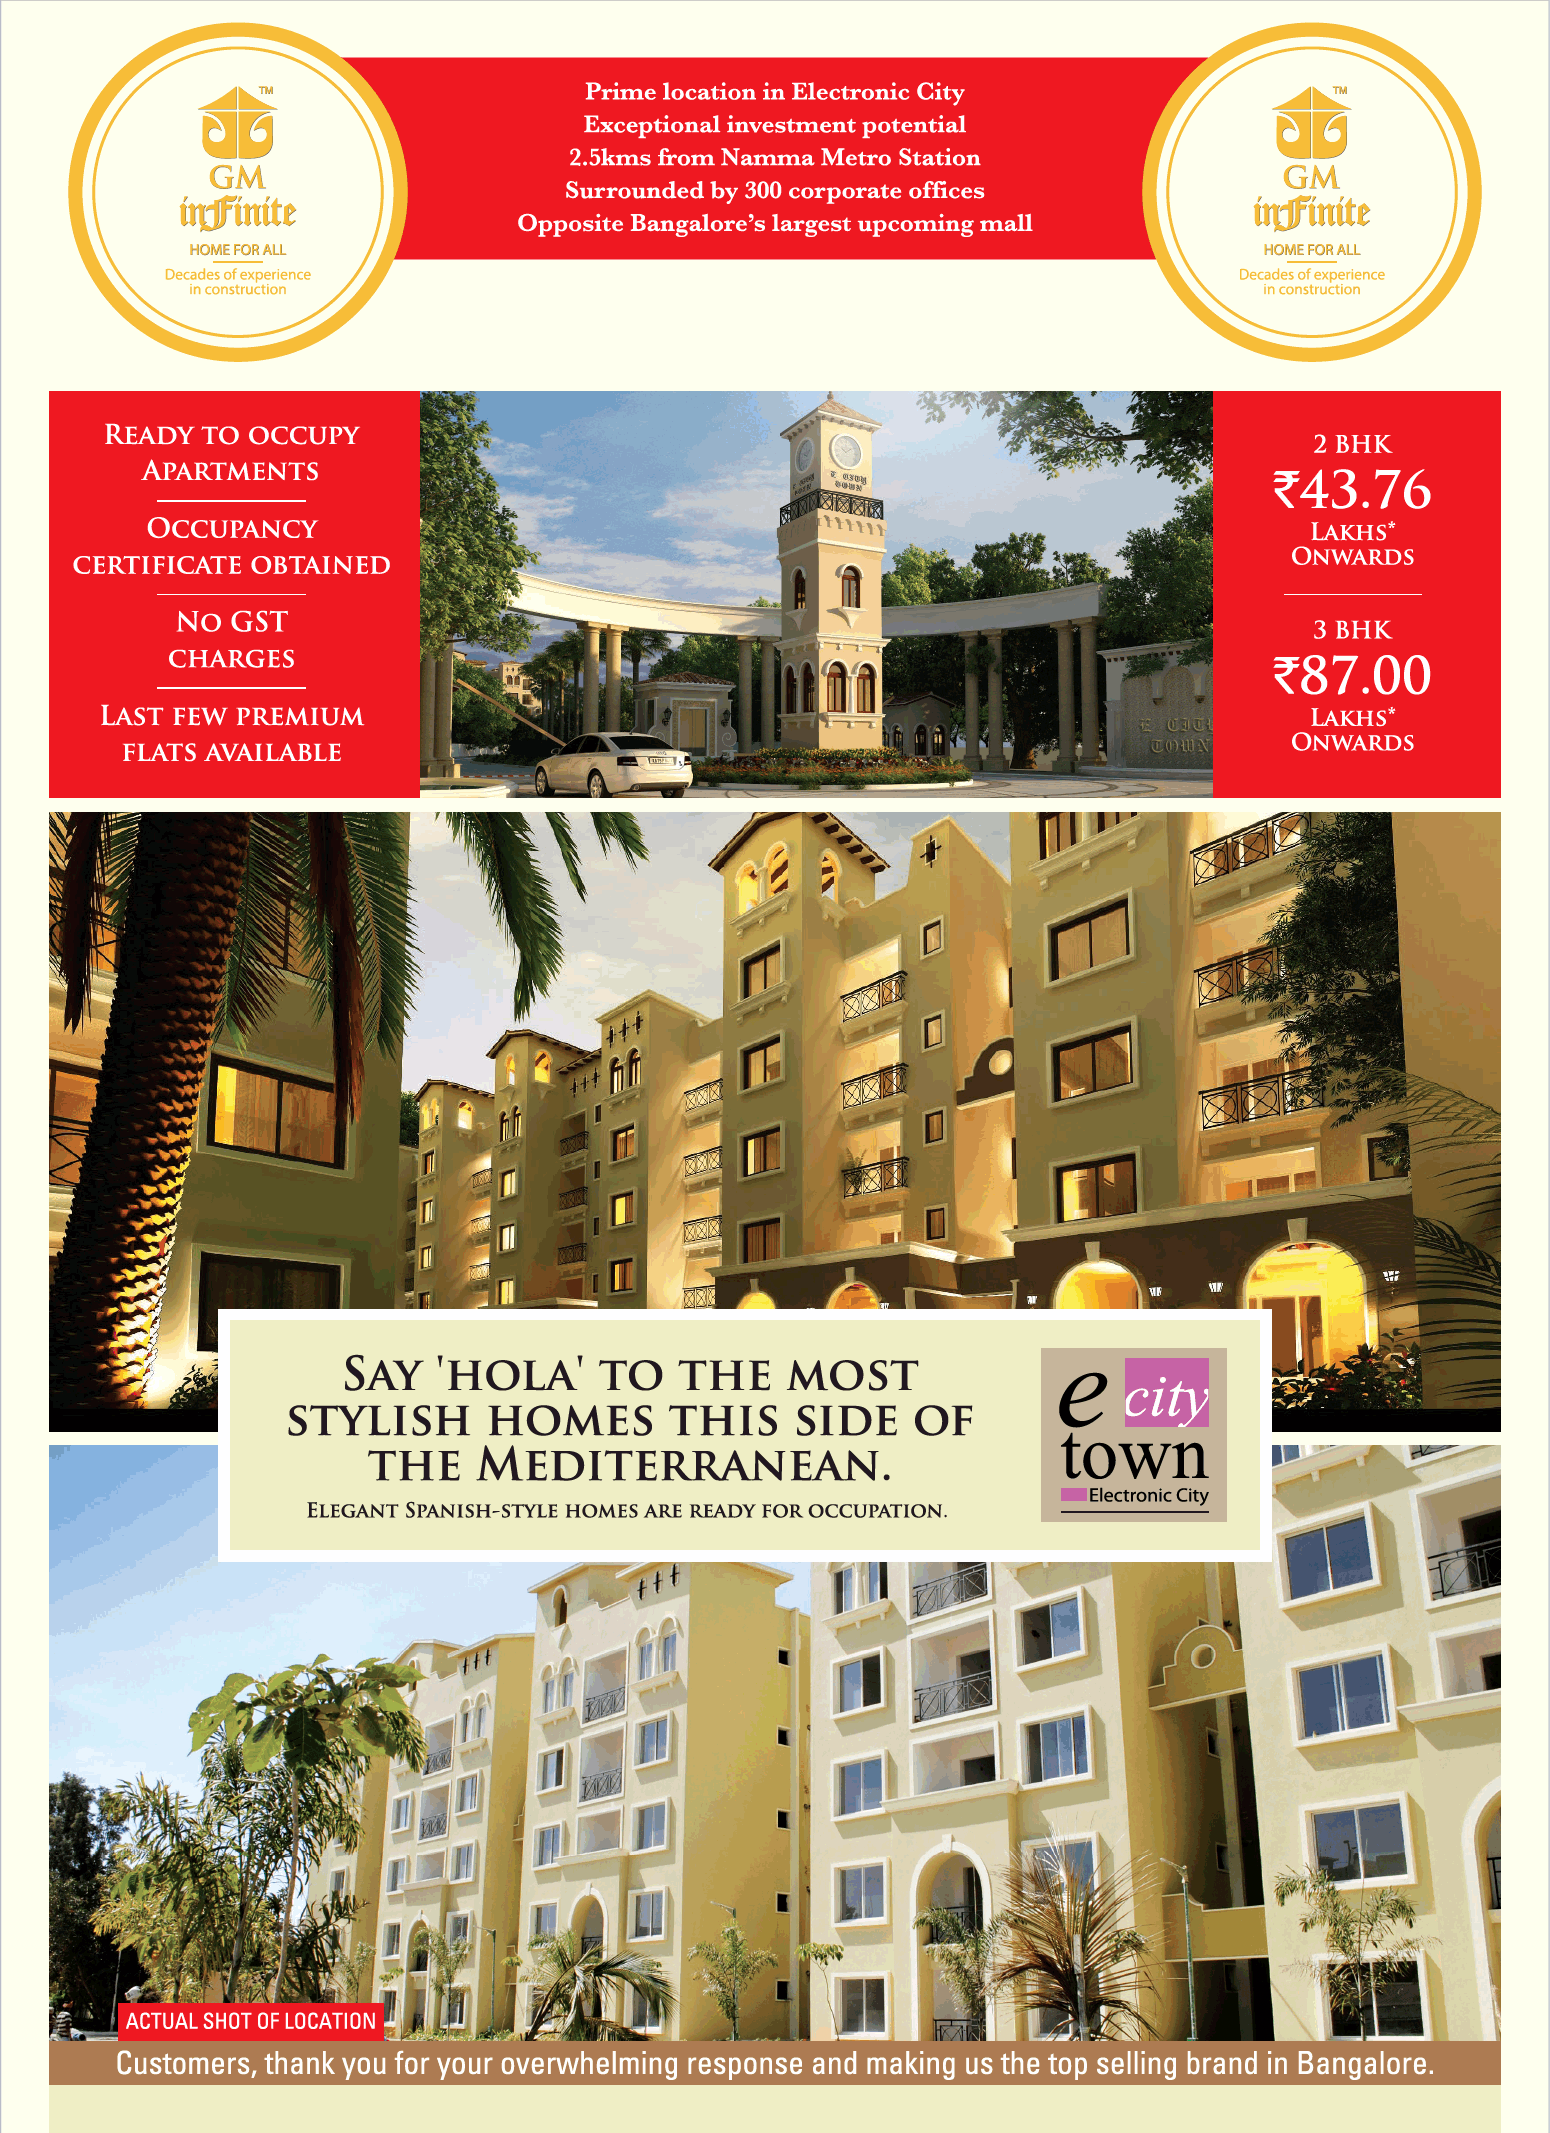 Avail elegant spanish styles homes are ready to occupation at GM Infinite E City Town in Bangalore Update